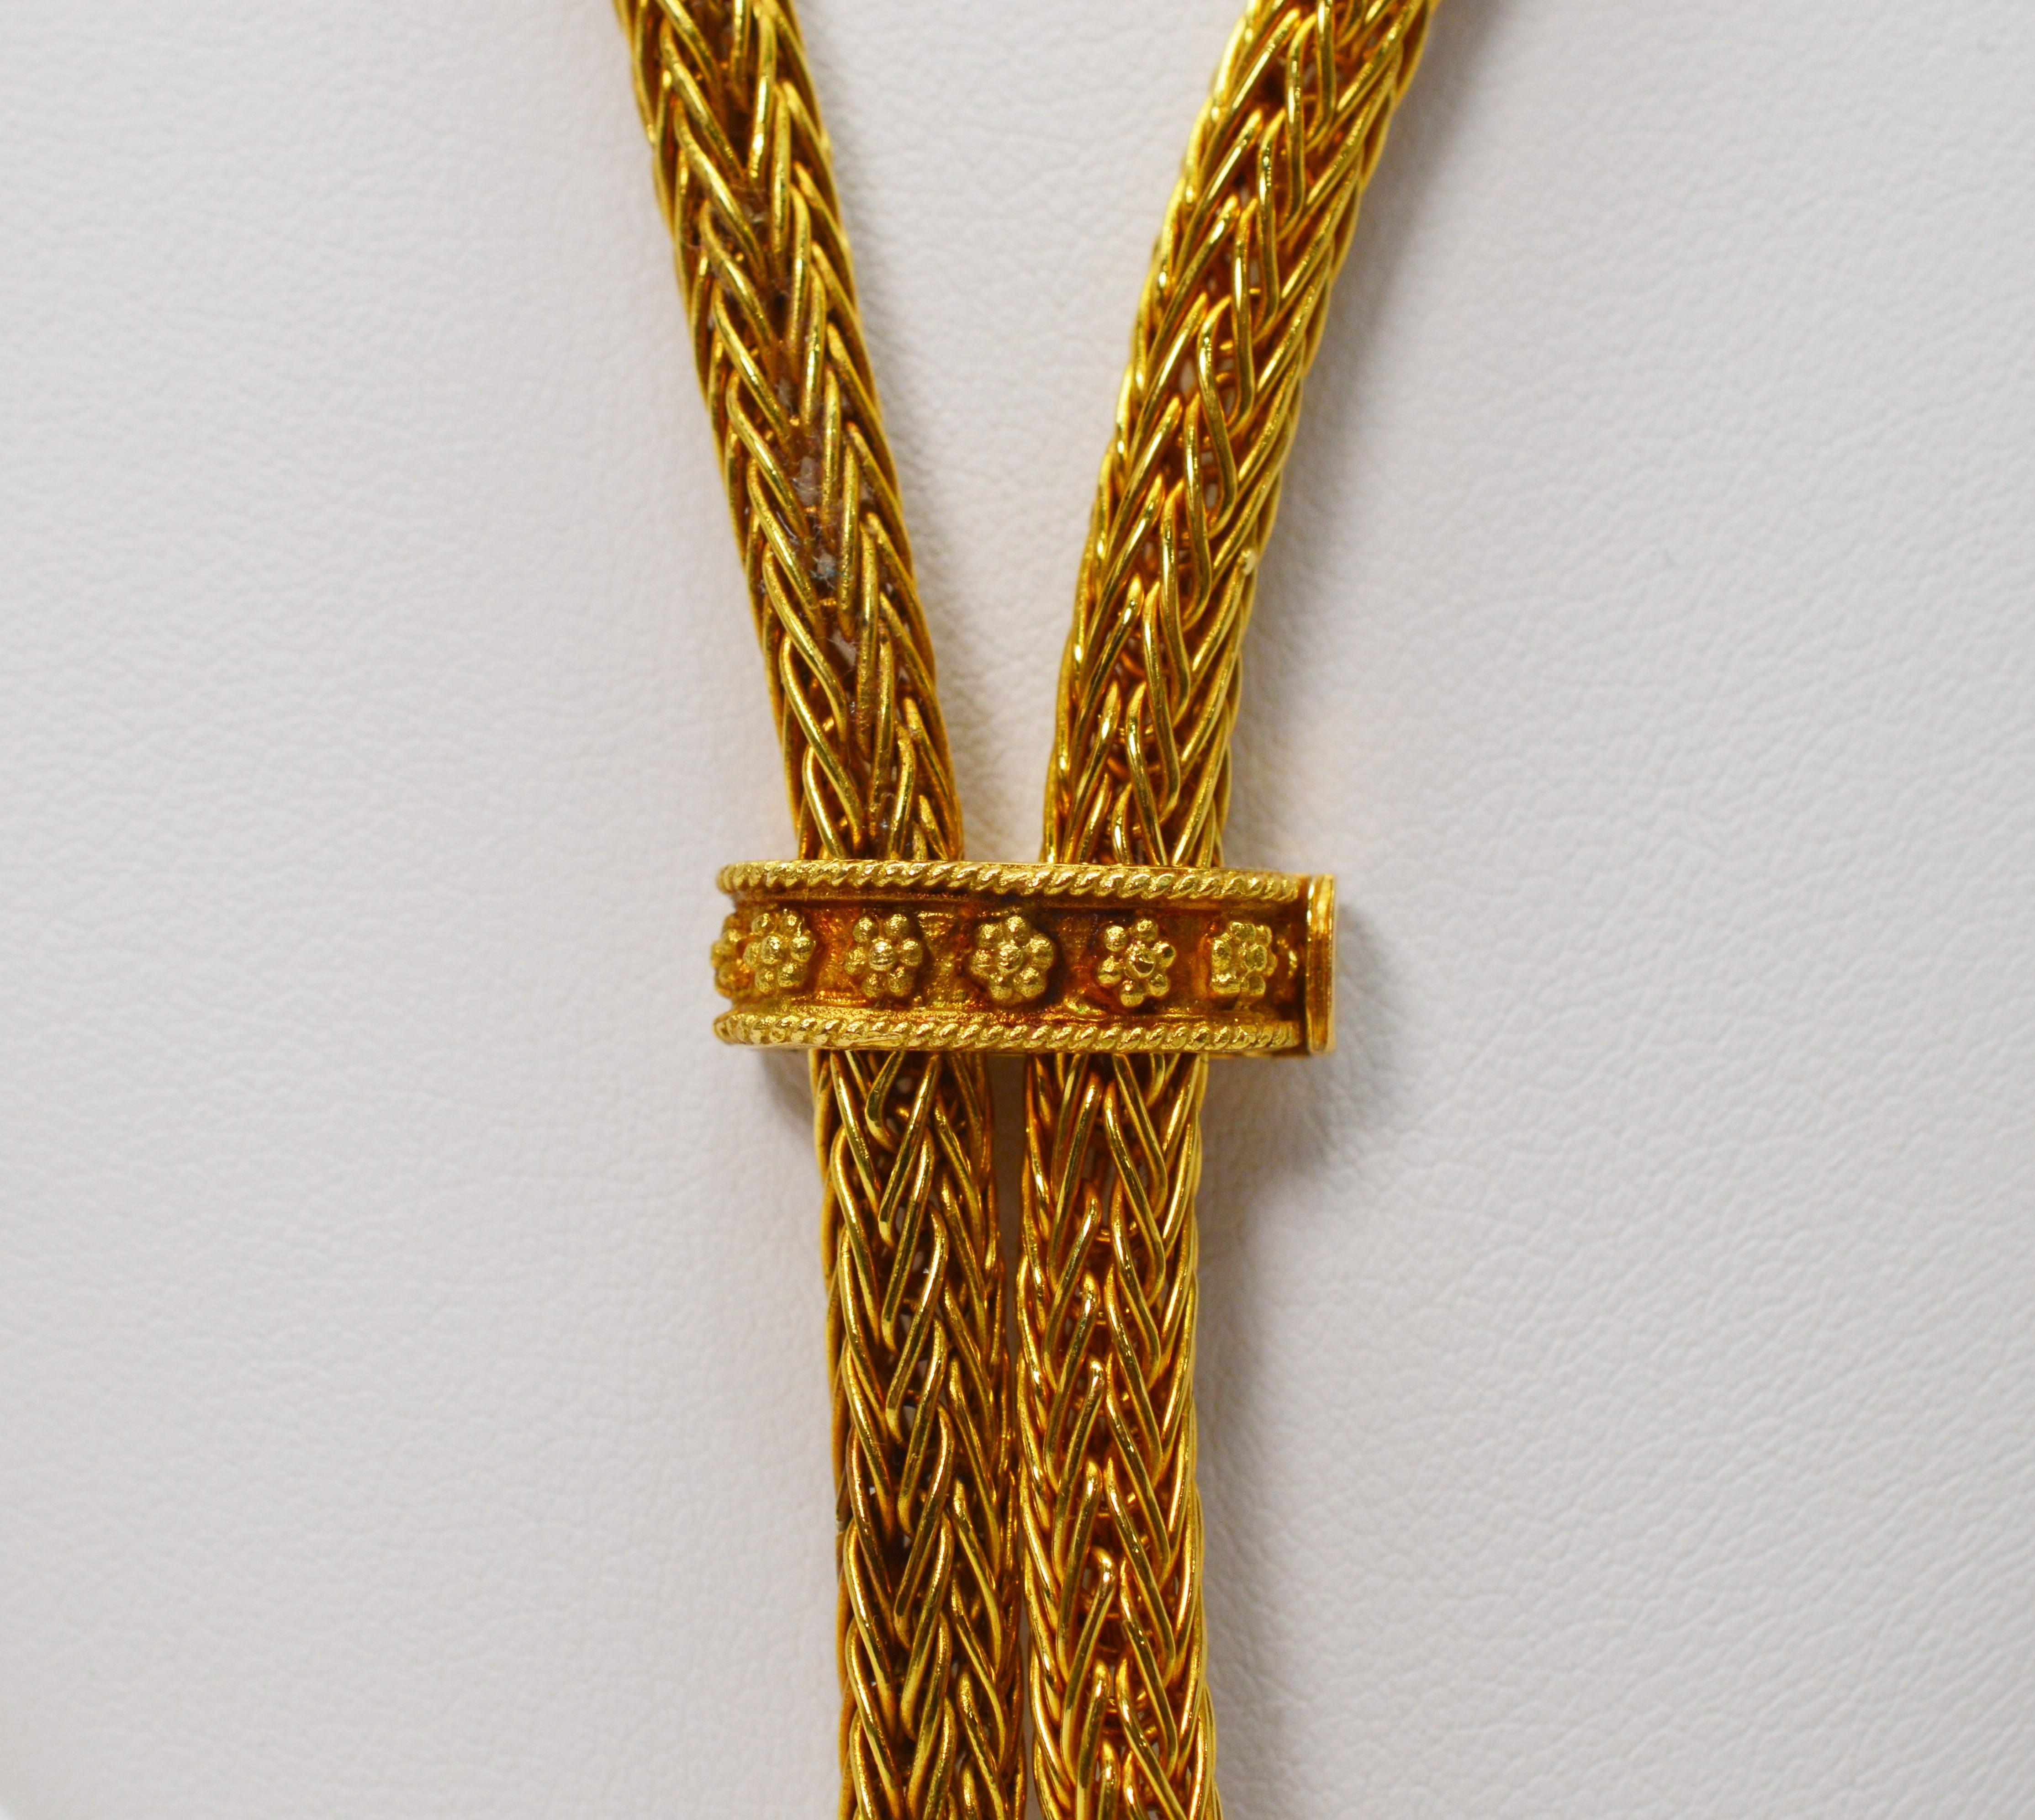 Woven 18 Karat Yellow Gold Lariat Necklace In Good Condition For Sale In Mount Kisco, NY